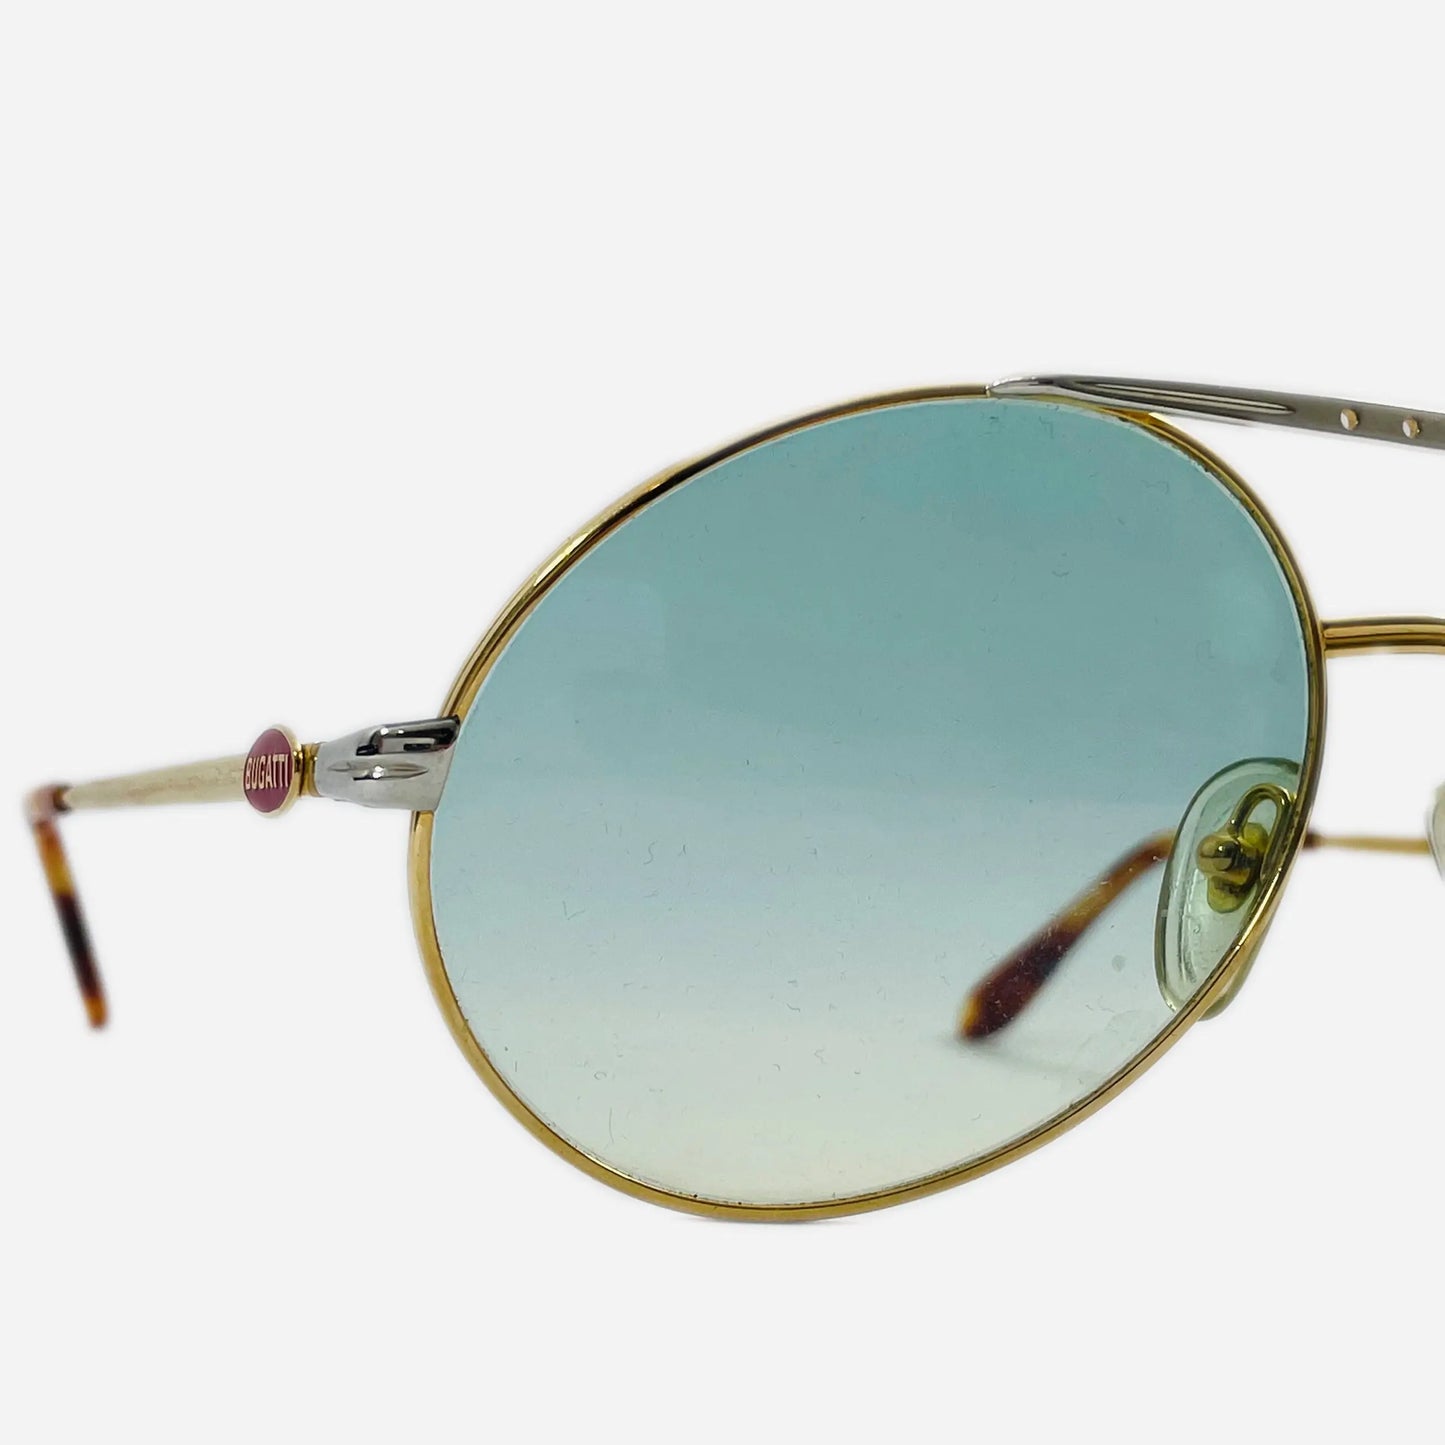 Ettore-Bugatti-Sonnenbrille-Sunglasses-Gold-Plated-14CT-the-seekers-front-detail